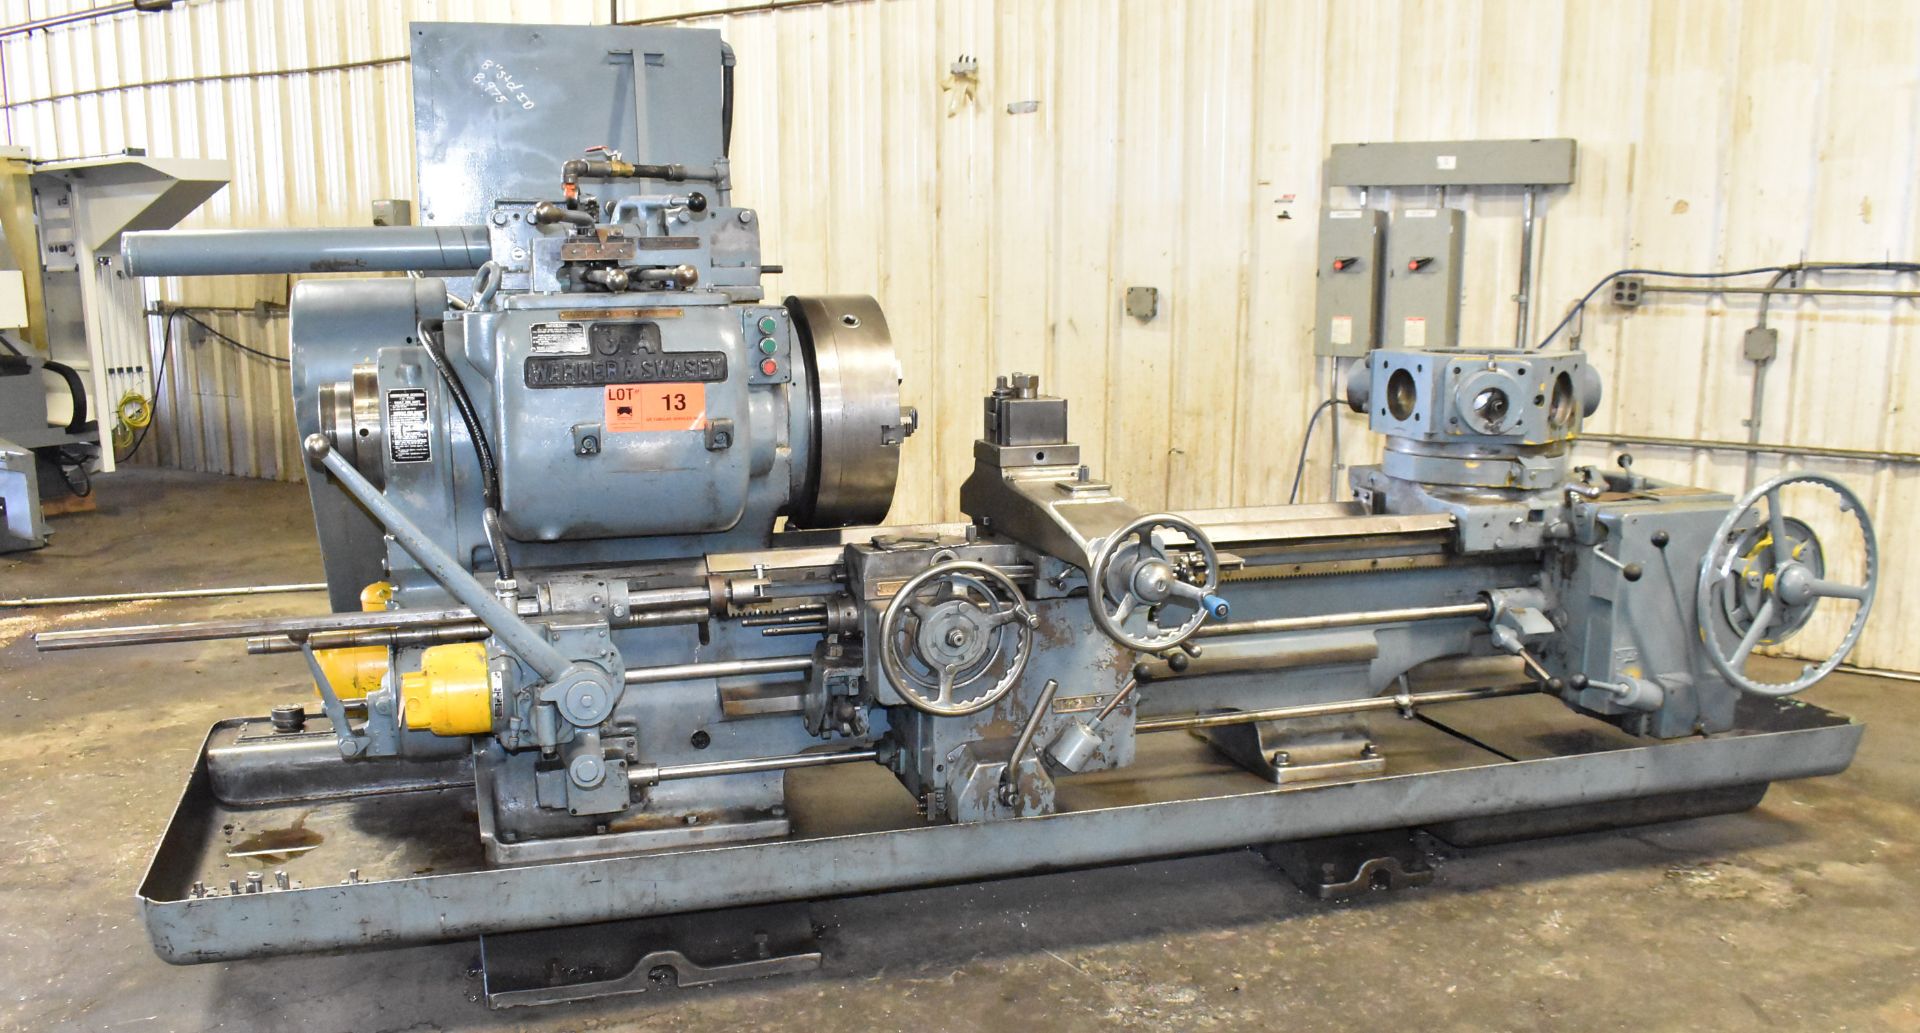 WARNER & SWASEY 3A TURRET LATHE WITH 24" SWING OVER BED, 52" DISTANCE BETWEEN CENTERS, 6.25" SPINDLE